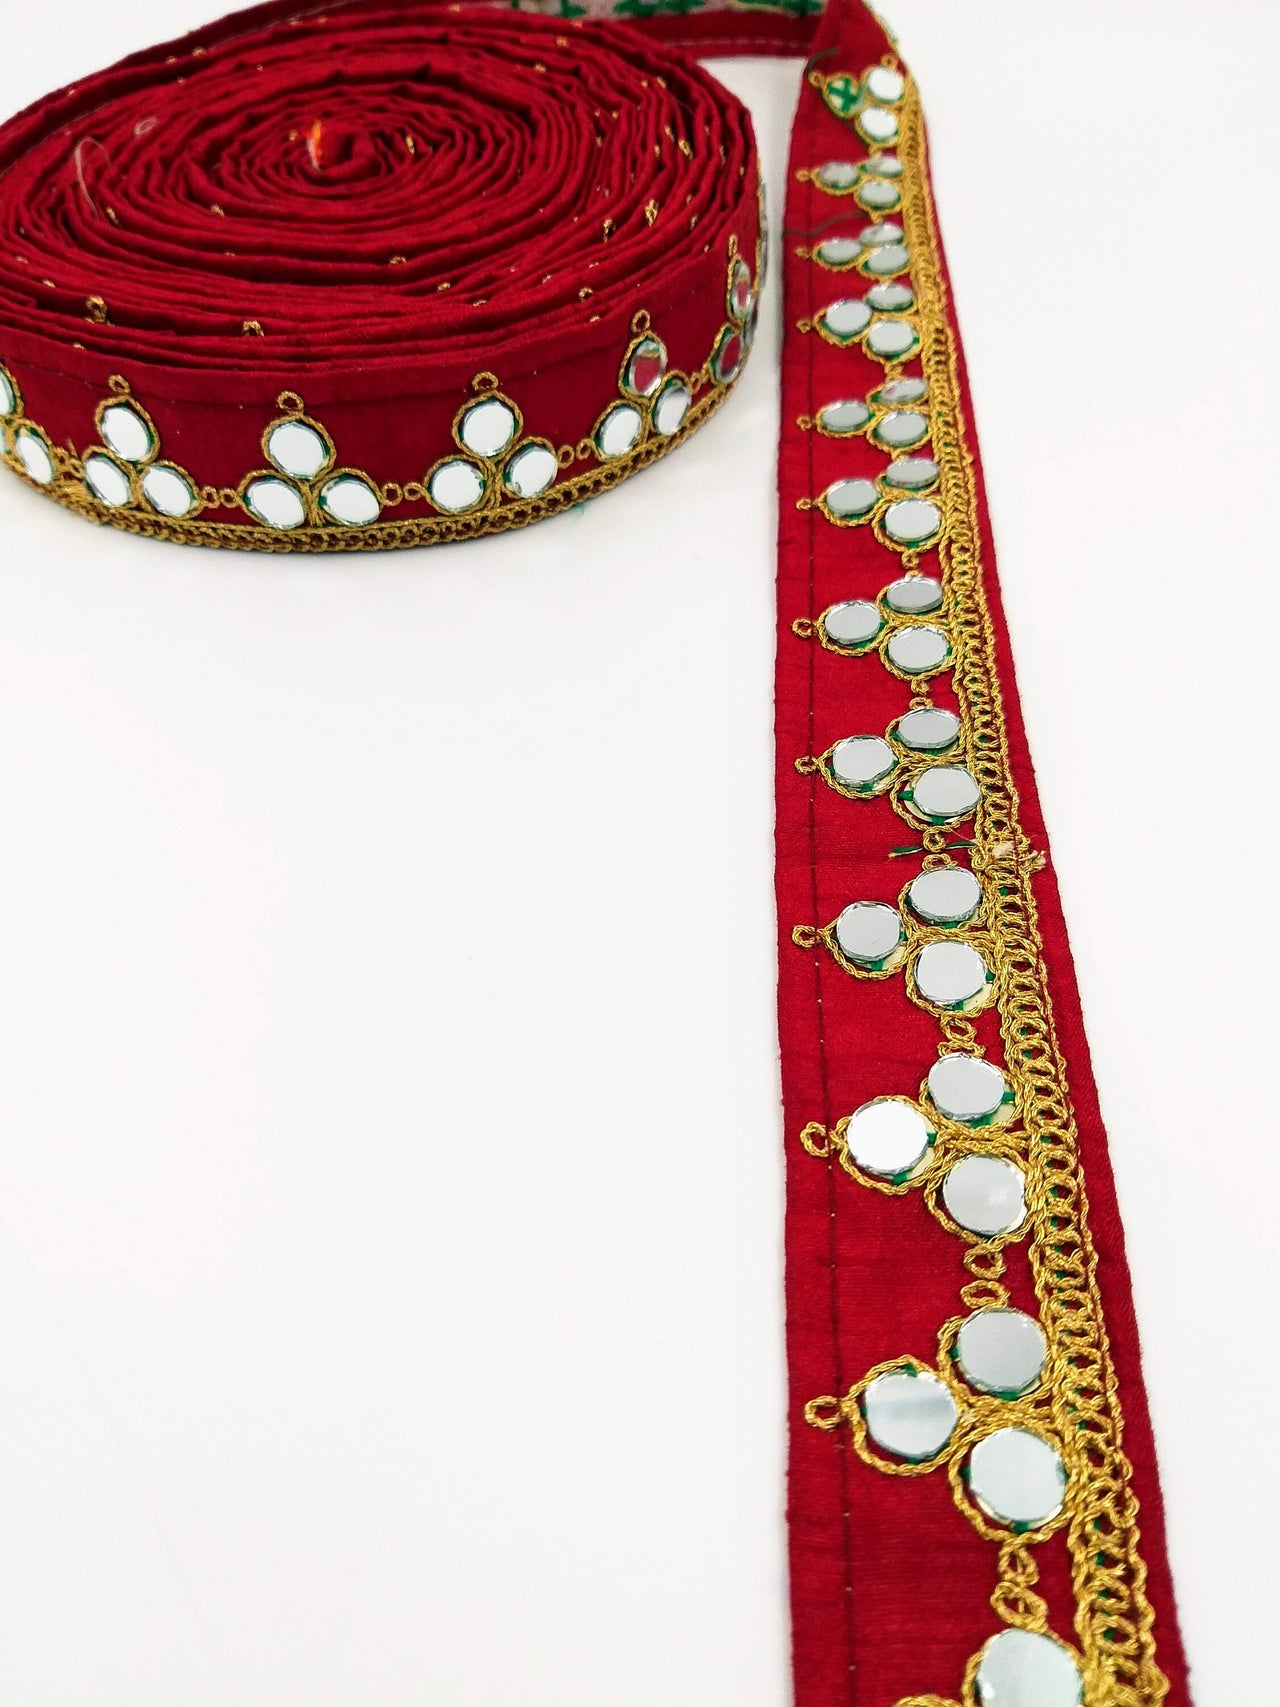 Maroon Red Silk Trim With Mirrors Embellishments and Gold Embroidery, Approx. 34mm Wide, Decorative Trim Costume Trim Fashion Trim By Yard